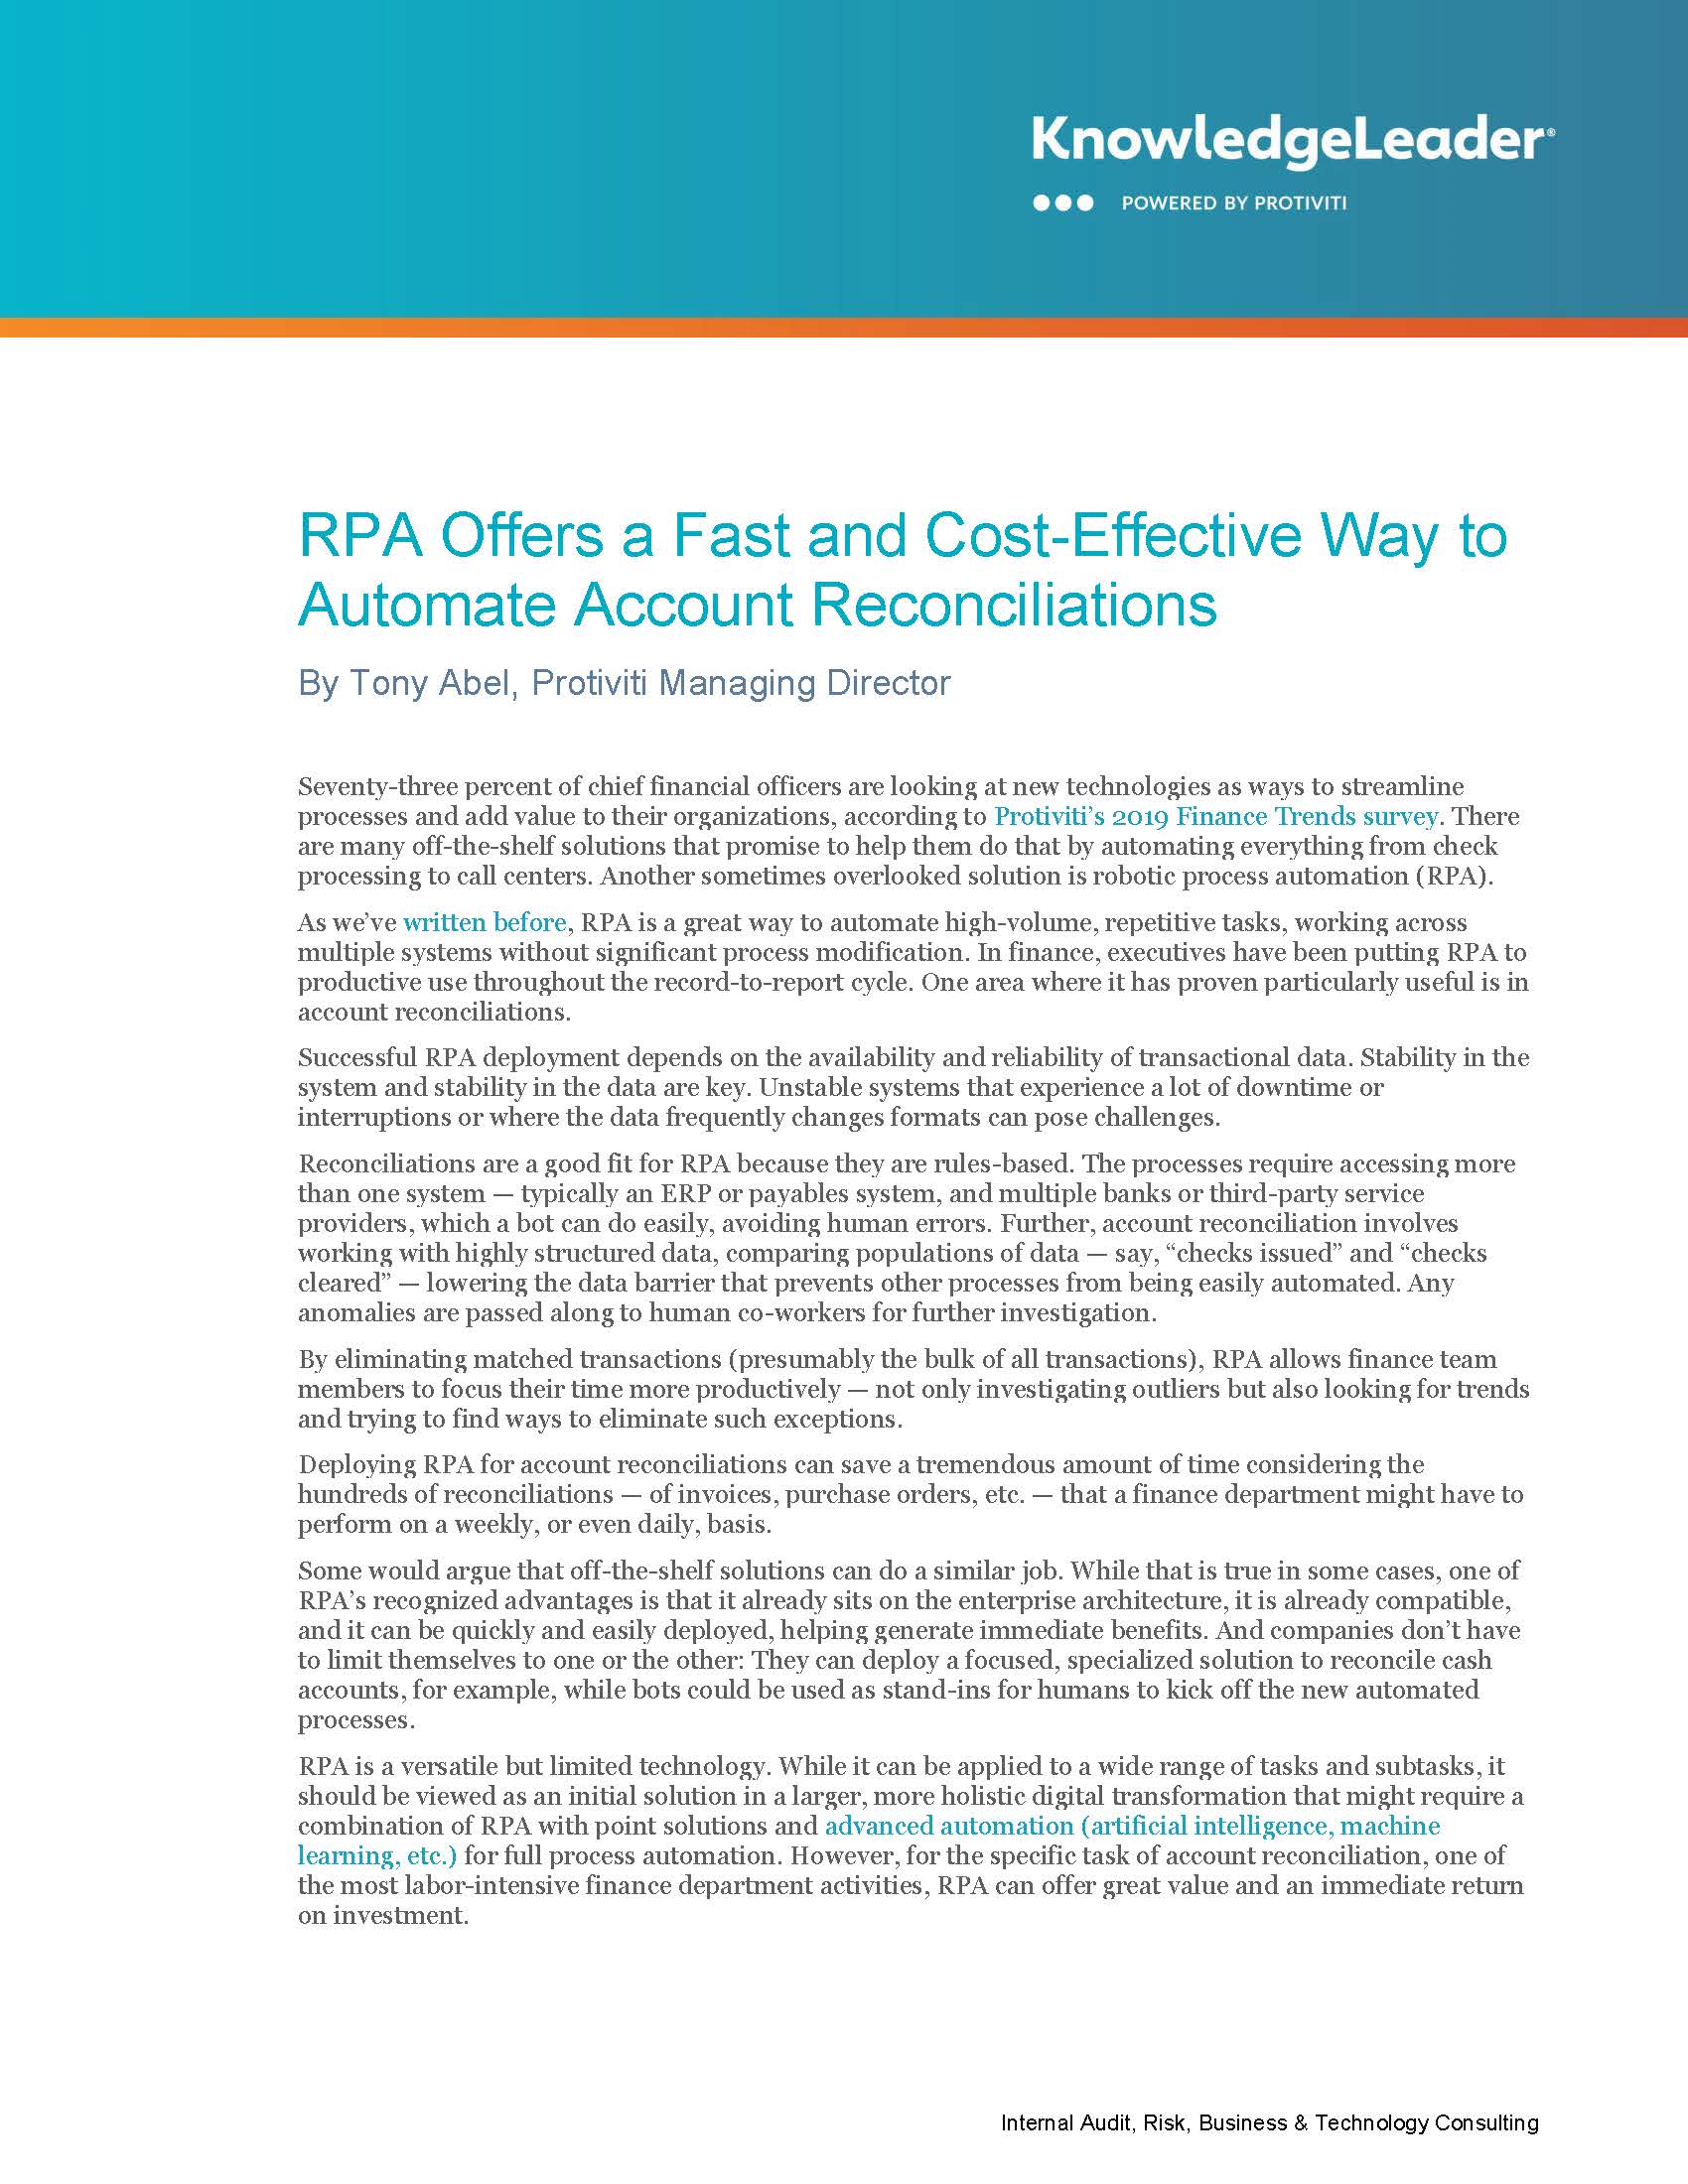 Screenshot of the first page of RPA Offers a Fast and Cost-Effective Way to Automate Account Reconciliations